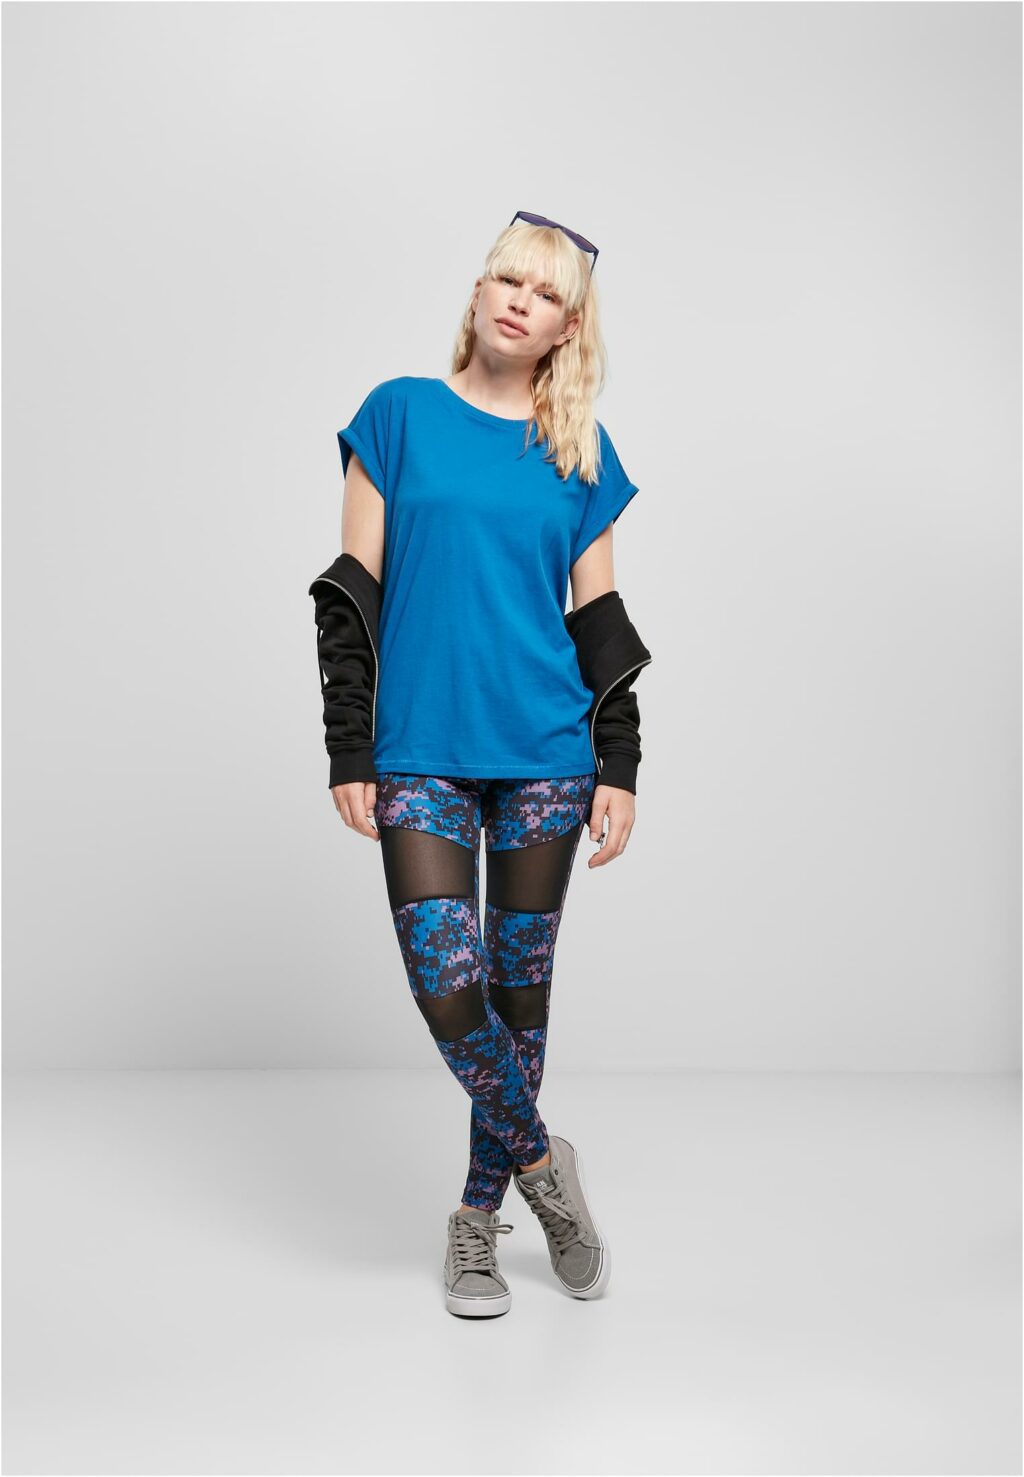 Urban Classics Ladies Extended Shoulder Tee sporty blue TB771